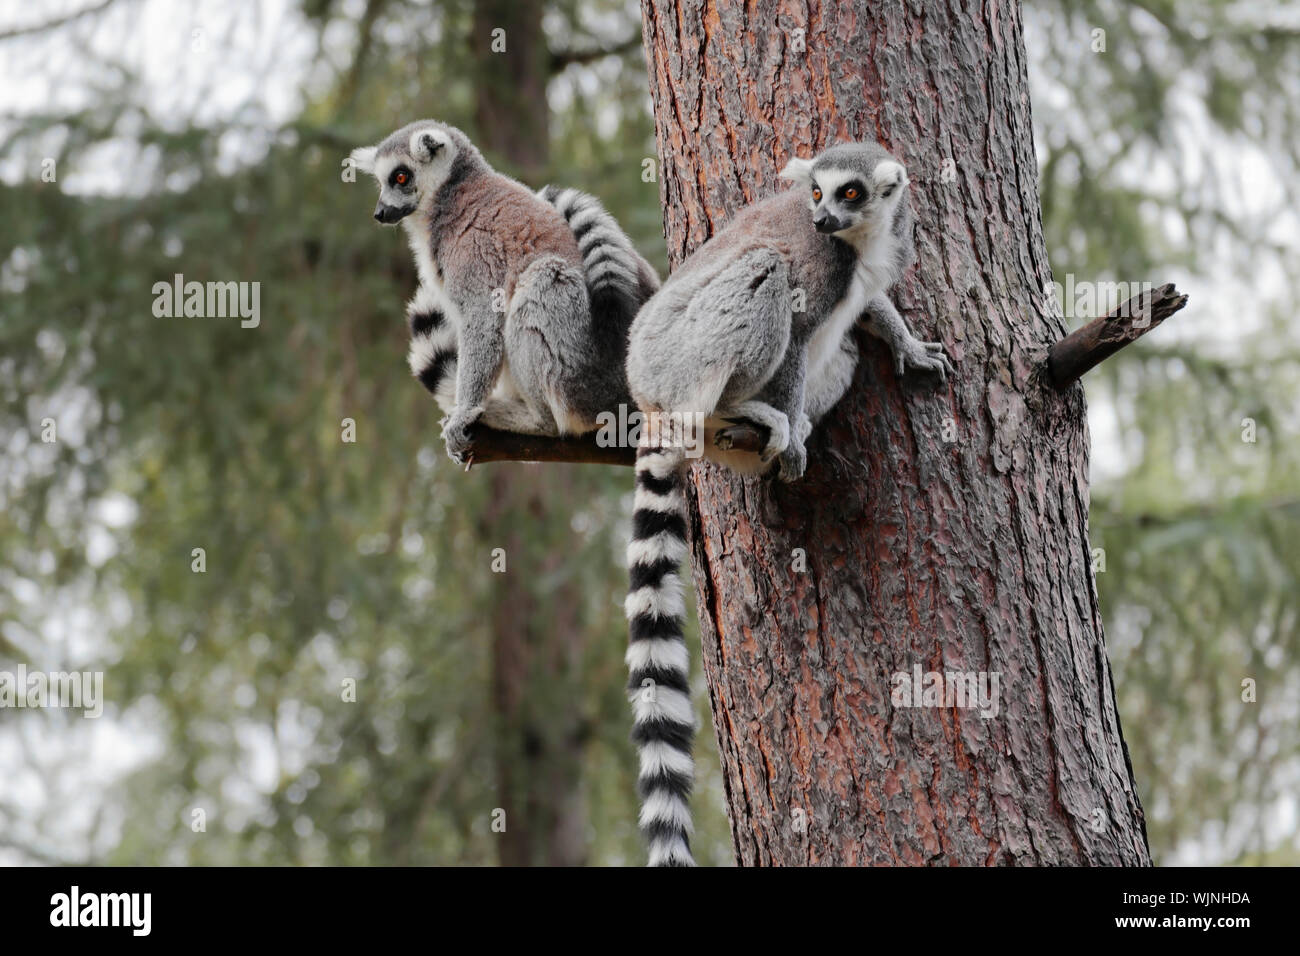 Two Ring Tailed Lemurs - Lemur catta - L. catta - on a pine tree trunk with distinctive bark texture Stock Photo